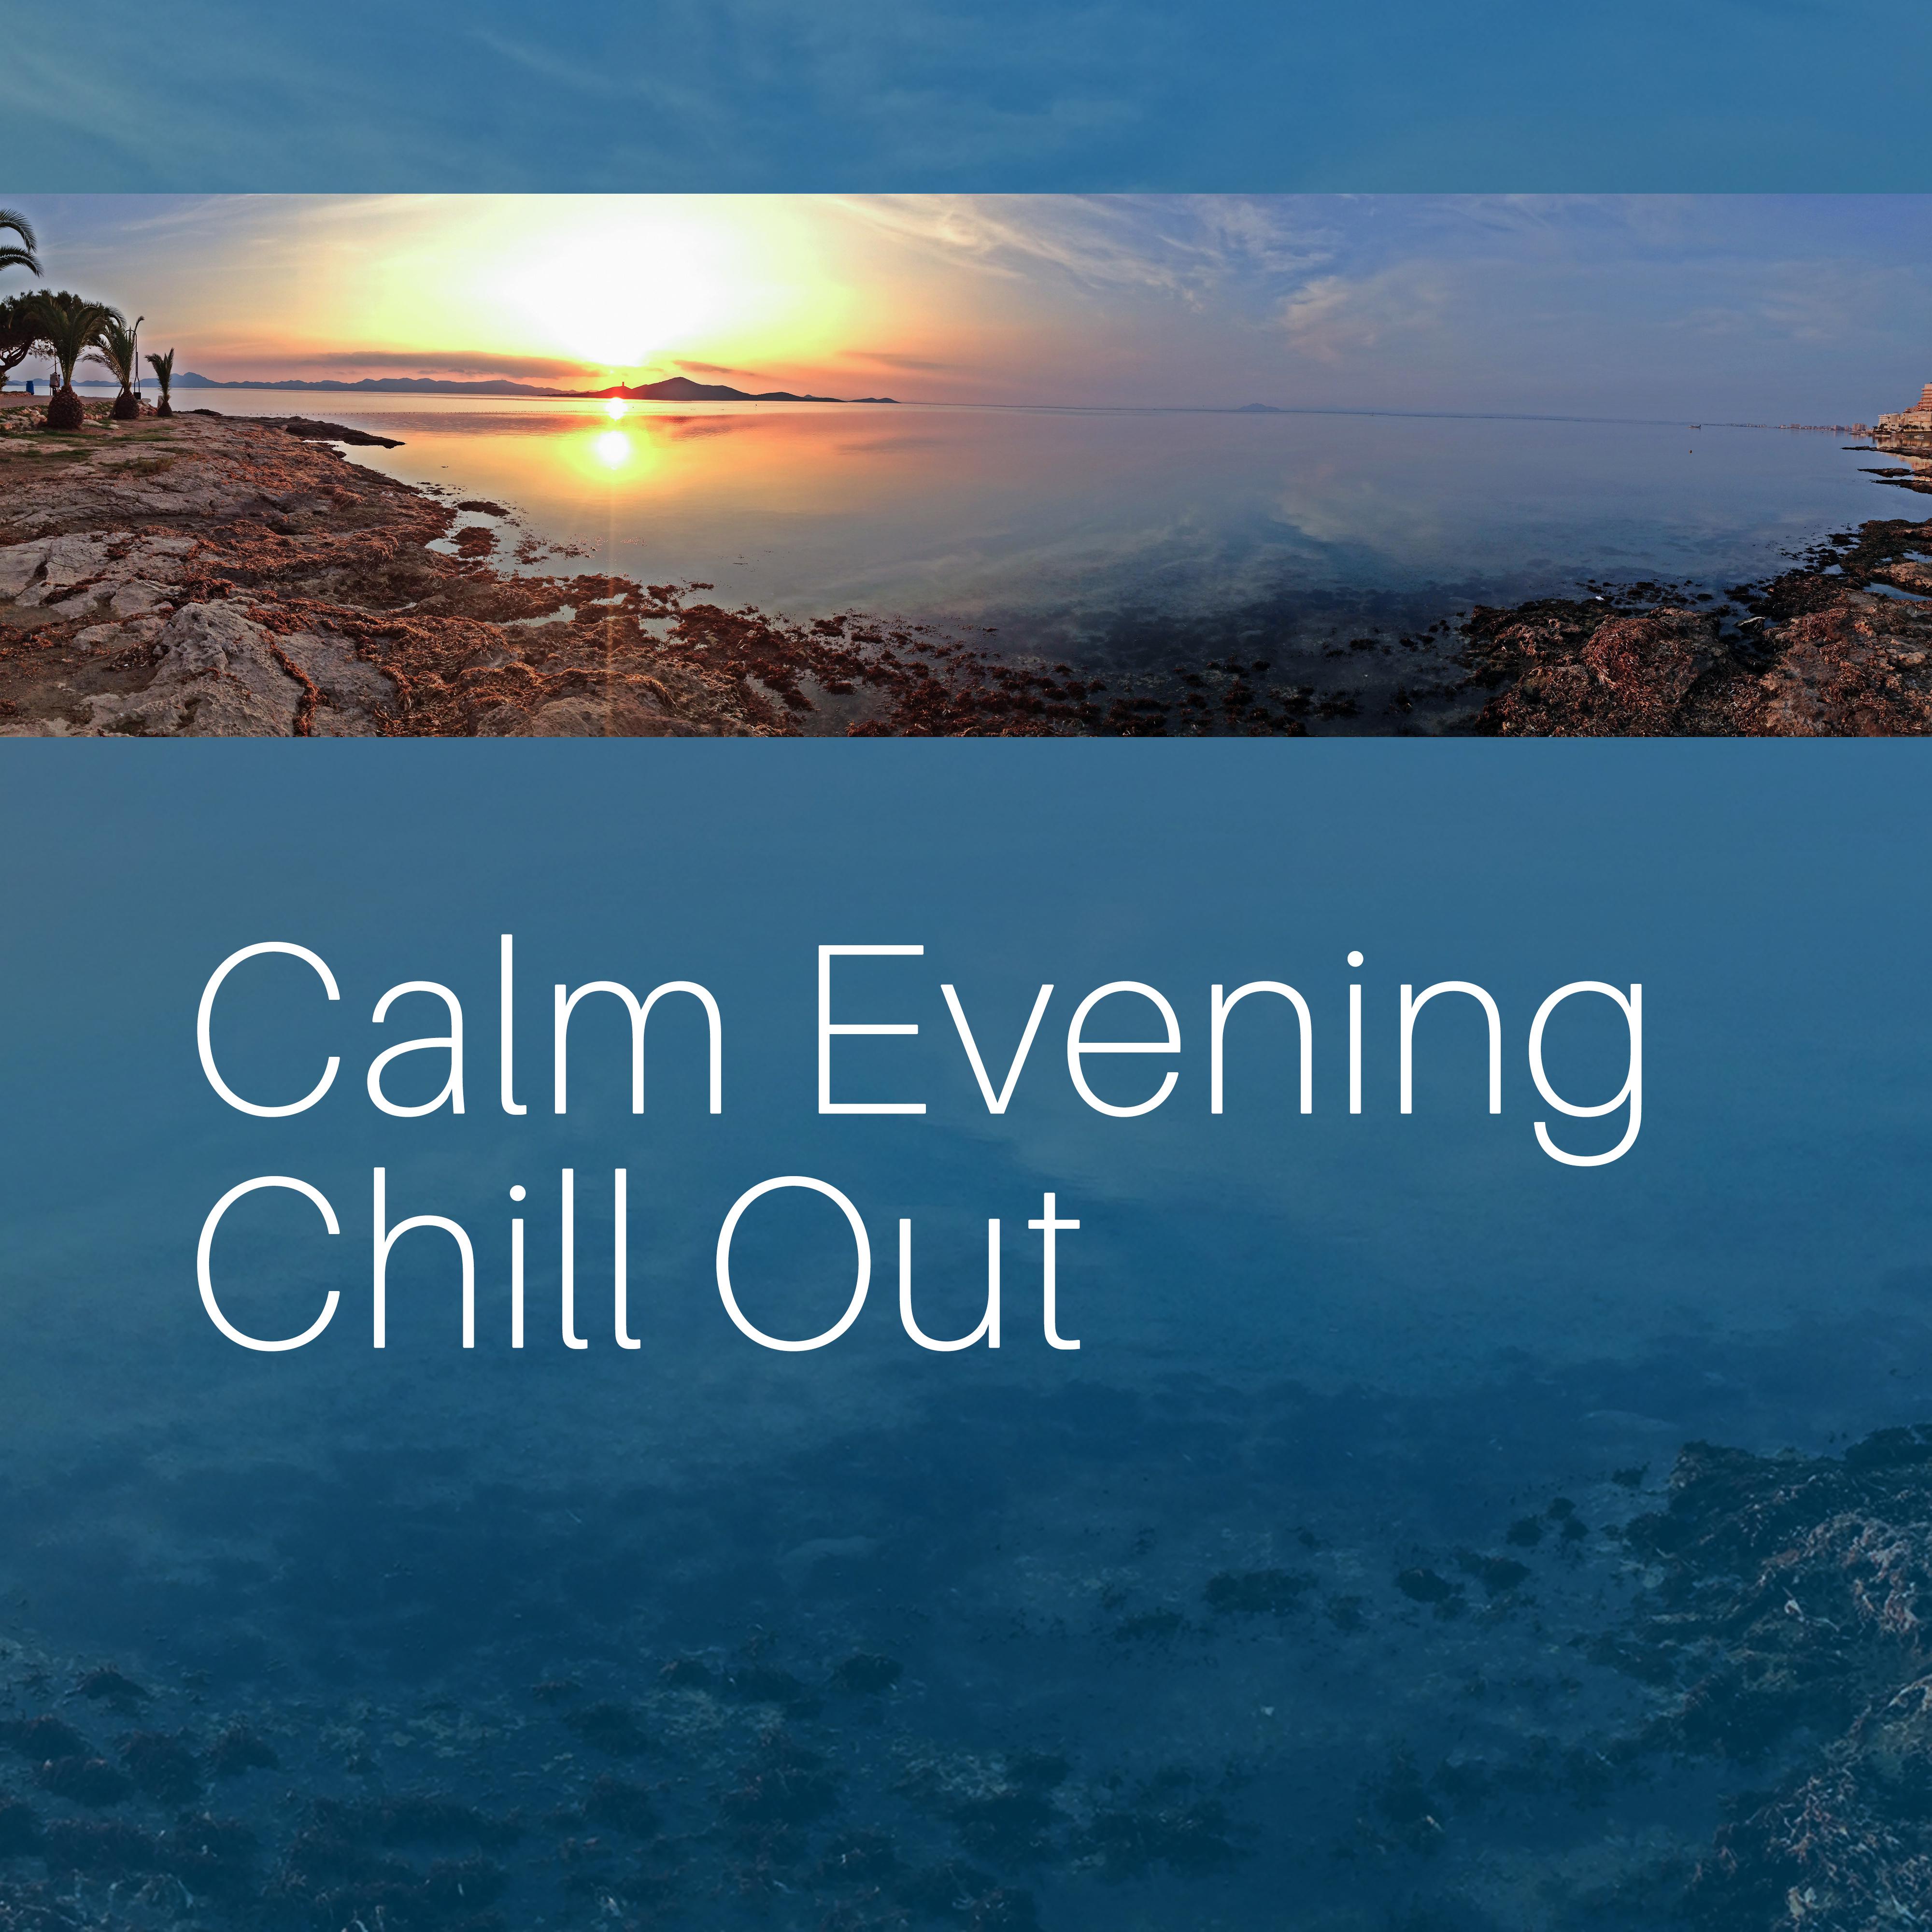 Calm Evening Chill Out – Stress Relief, Night Relaxation, Summer Soft Vibes, Chill a Bit